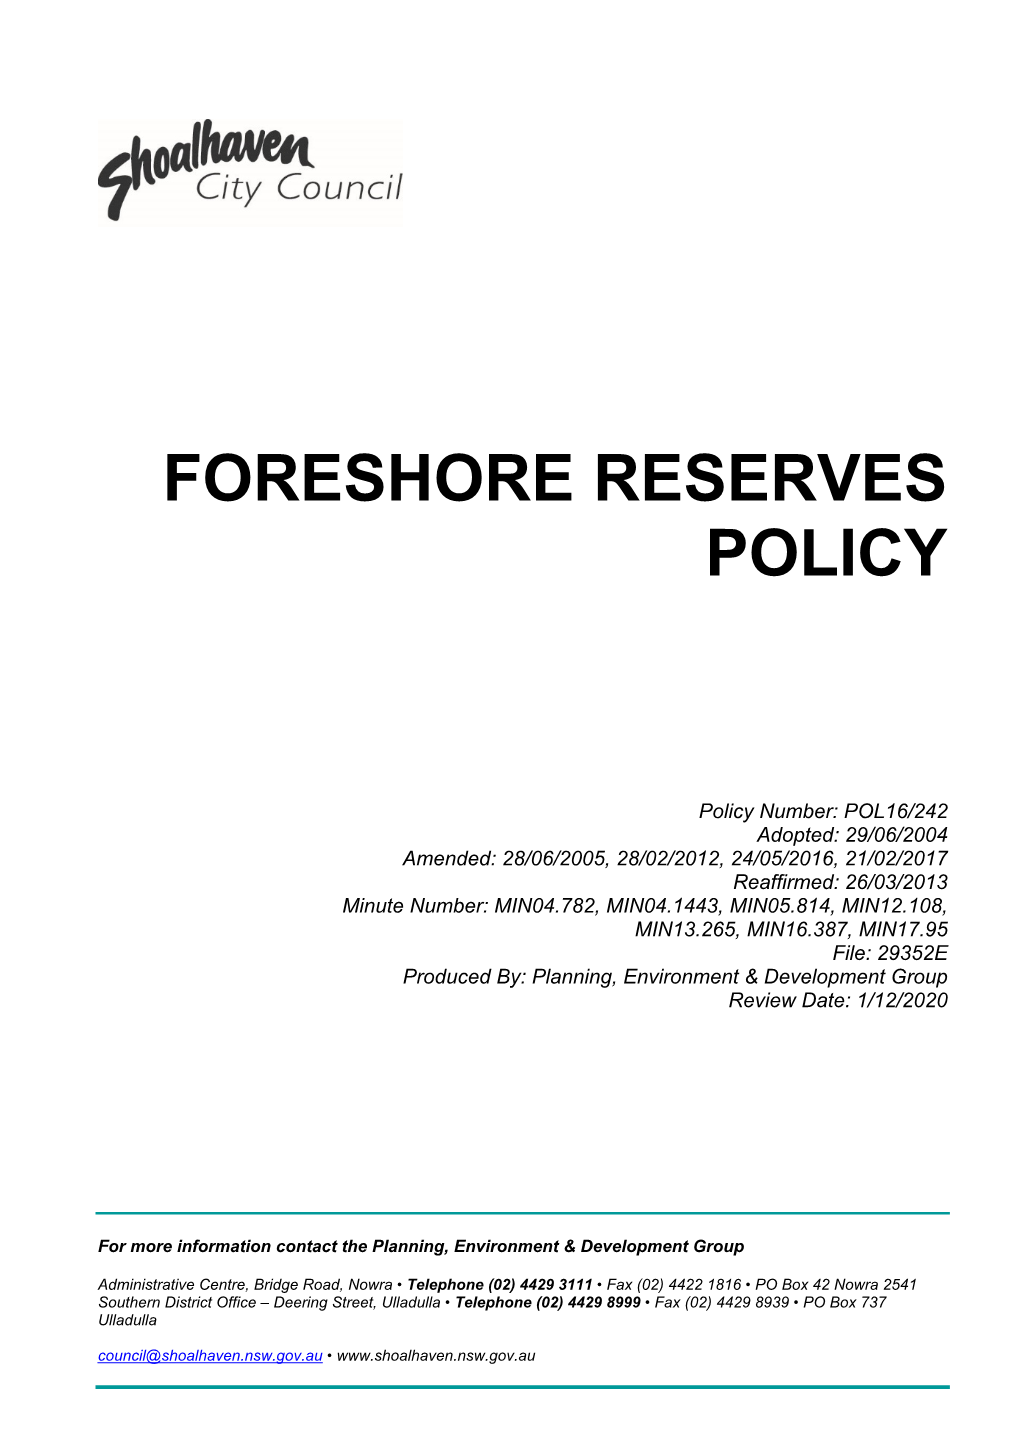 Foreshore Reserves Policy